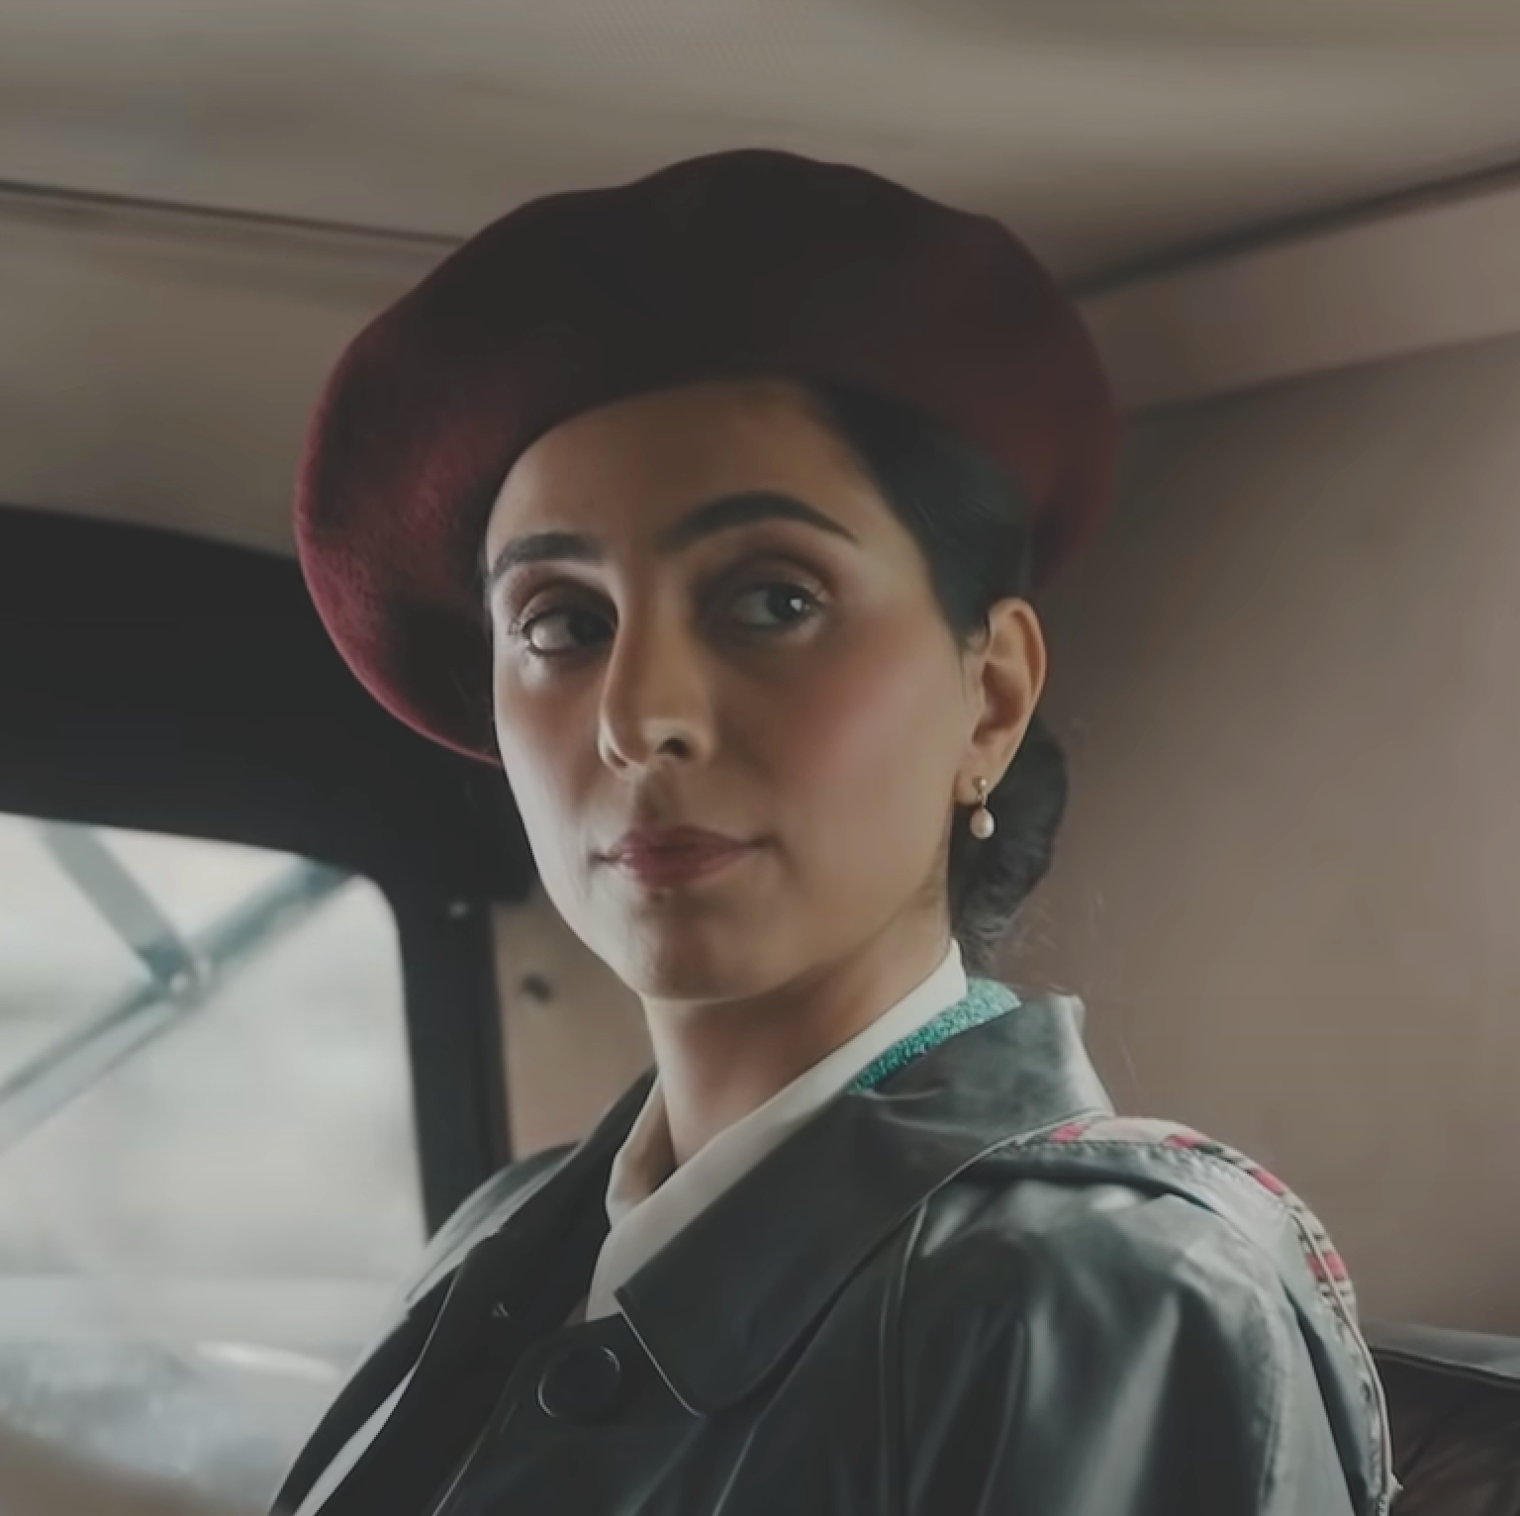 Munich The Edge of War premieres on Netflix today with Anjli Mohindra playing the part of British diplomatic secretary Joan